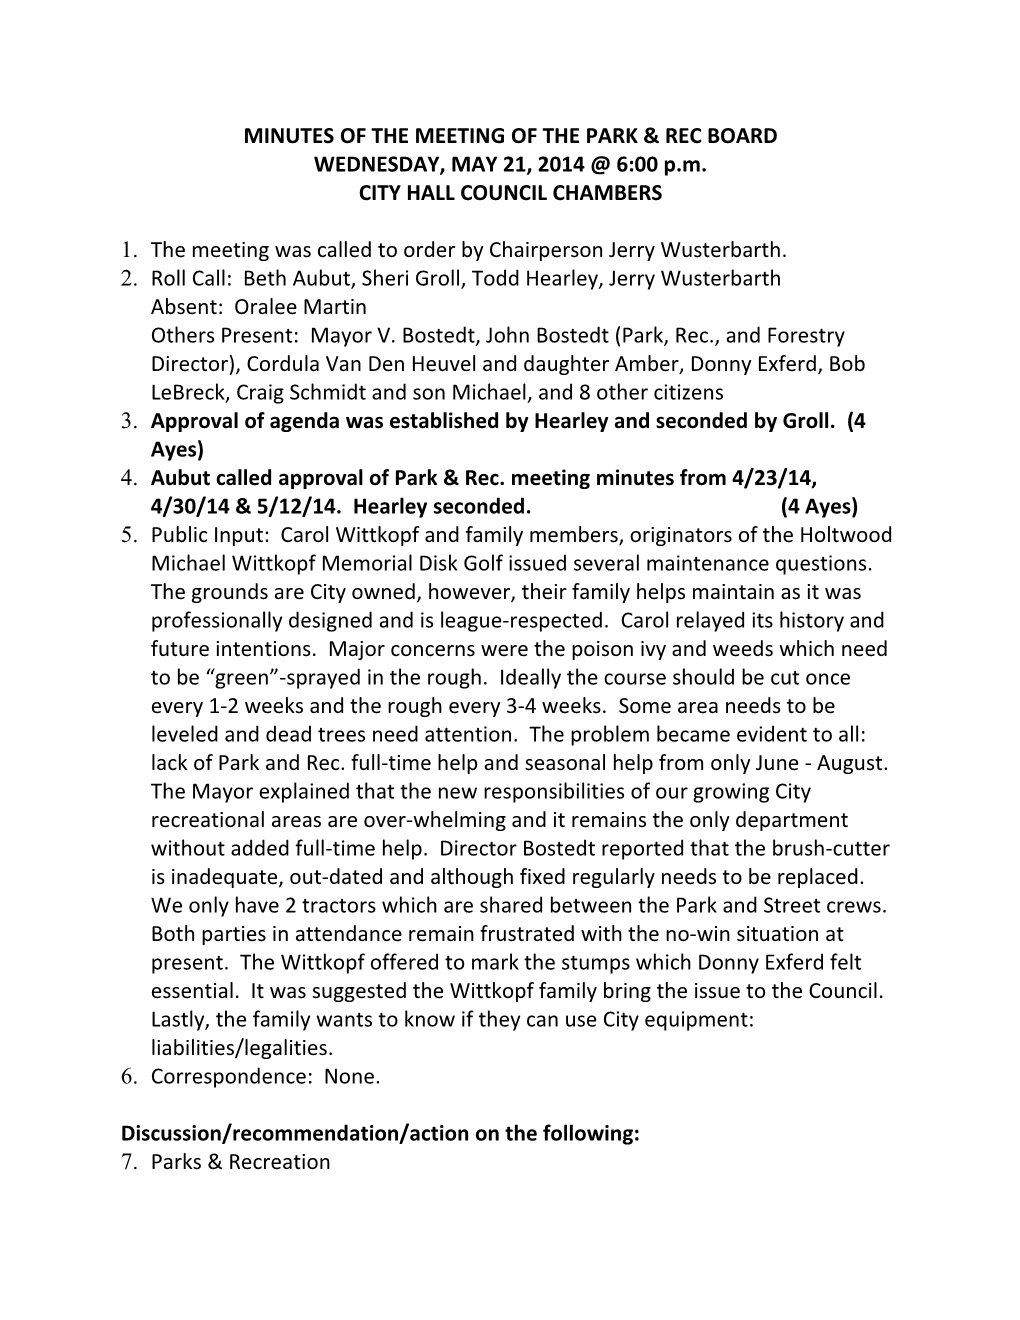 Minutes of the Meeting of the Park & Rec Board